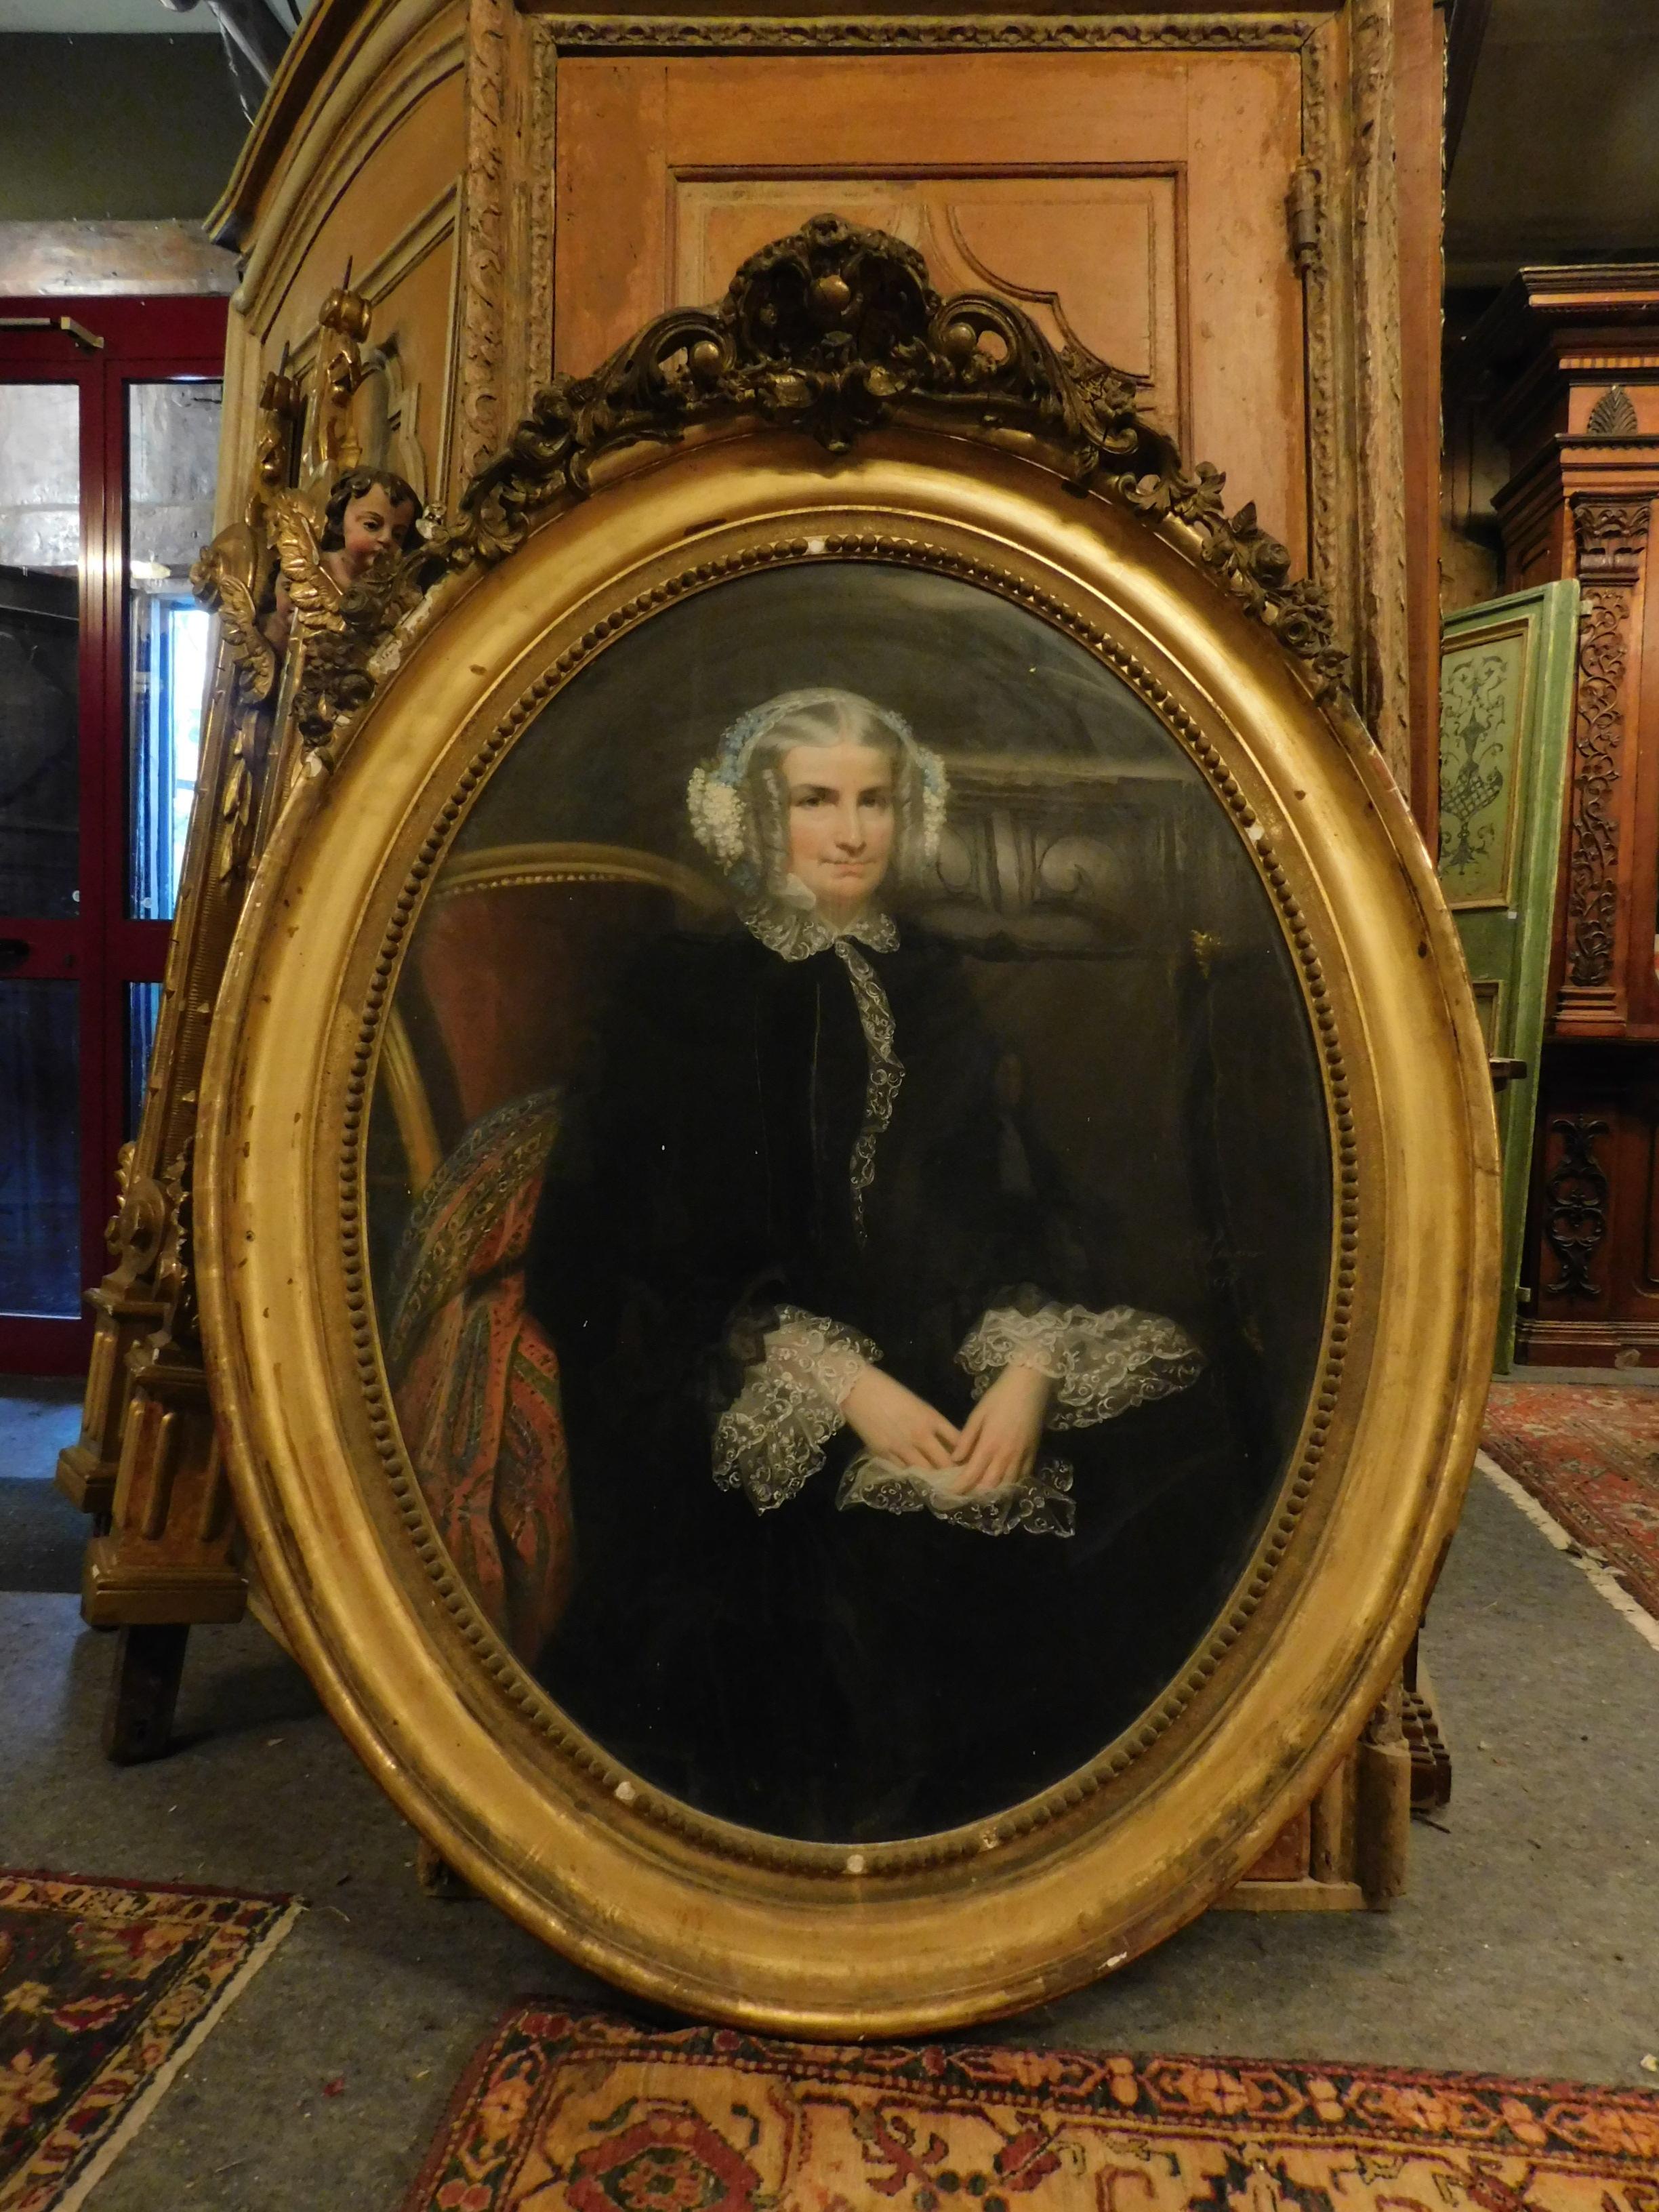 Antique portrait with golden frame, depicting an ancestor of a noble family. hand-drawn and hand-made by an artist who signs himself: A. Laugien, dated 1851. Measures cm W 125 x H 170 x D 17. Precious gilded frame, entirely hand-sculpted.